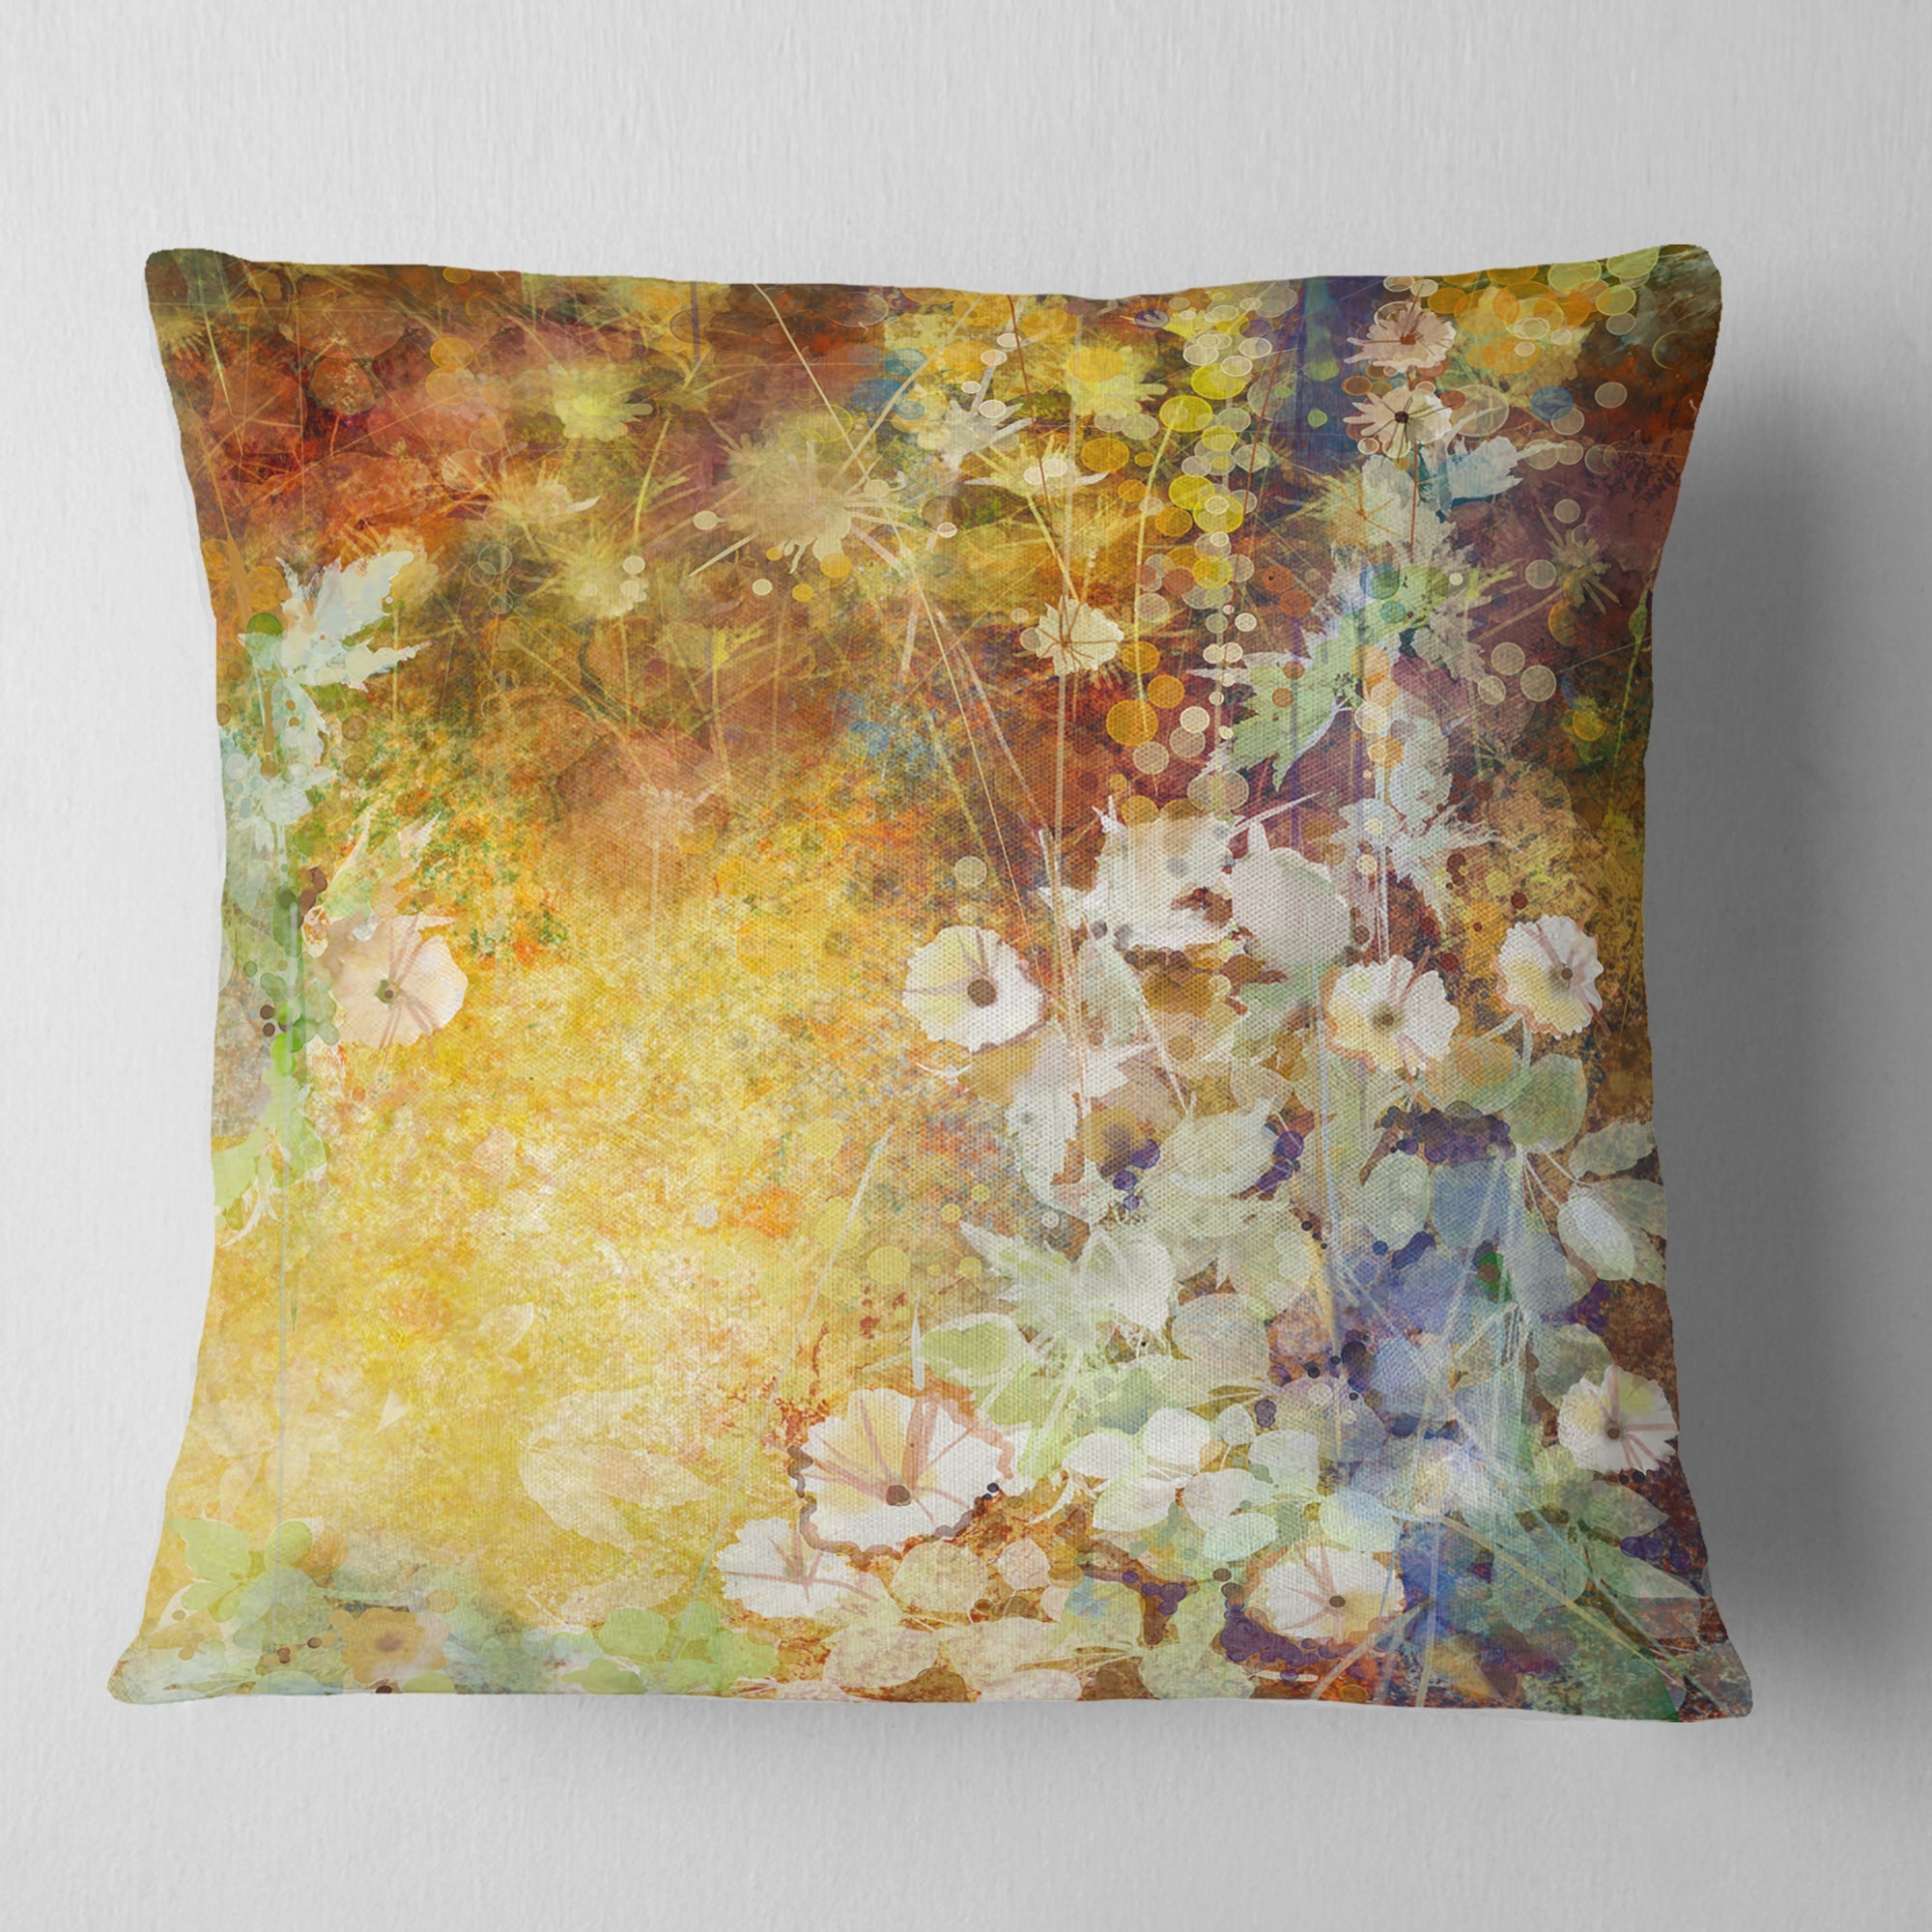 Little Flowers with Soft Green Leaves - Floral Throw Pillow